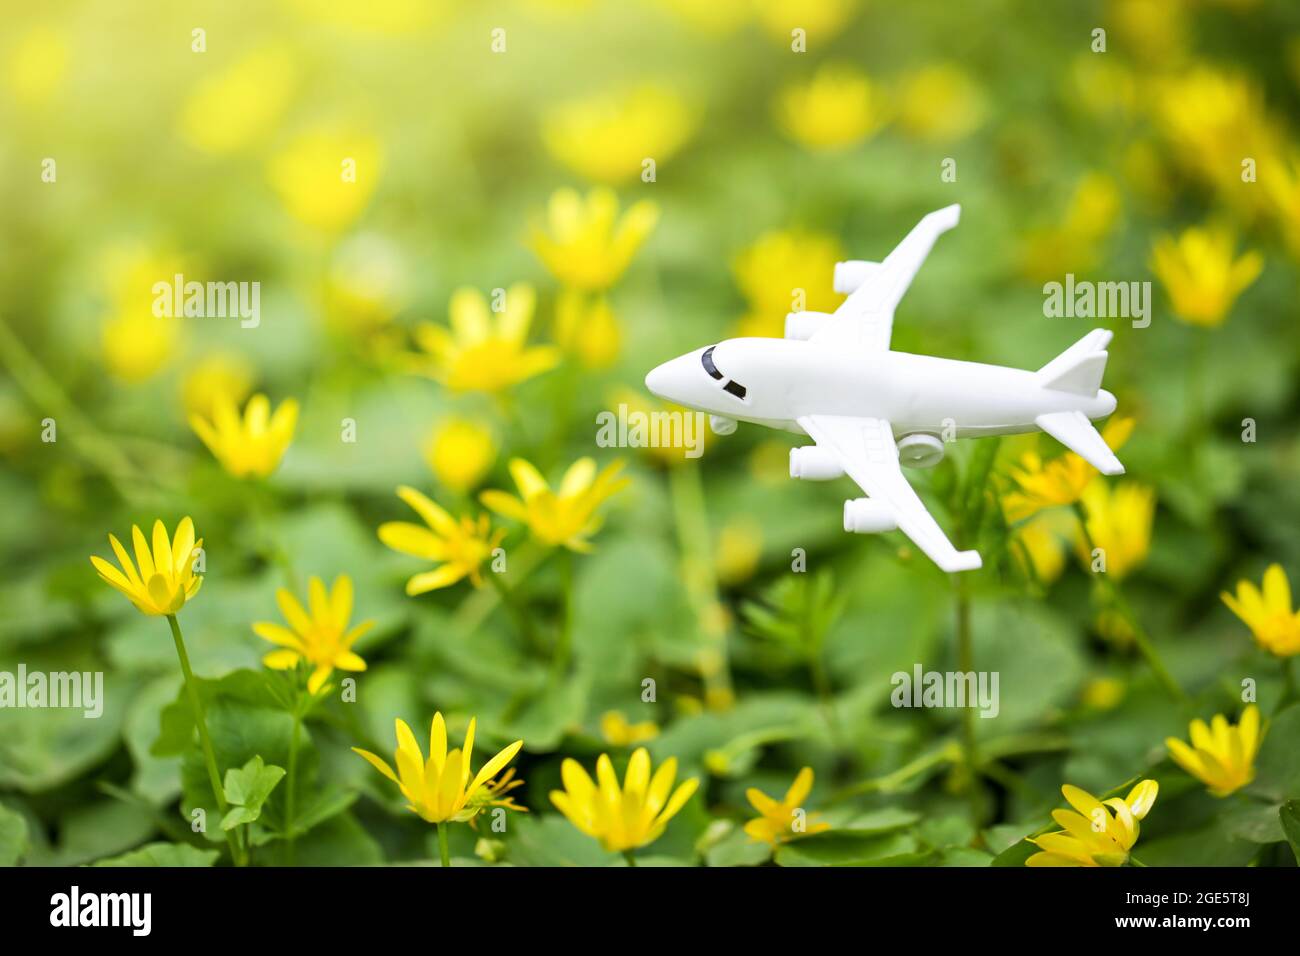 Sustainable Aviation Fuel. White airplane model on flower fresh green leaves background. Clean and Green energy, Biofuel for aviation industry. Stock Photo